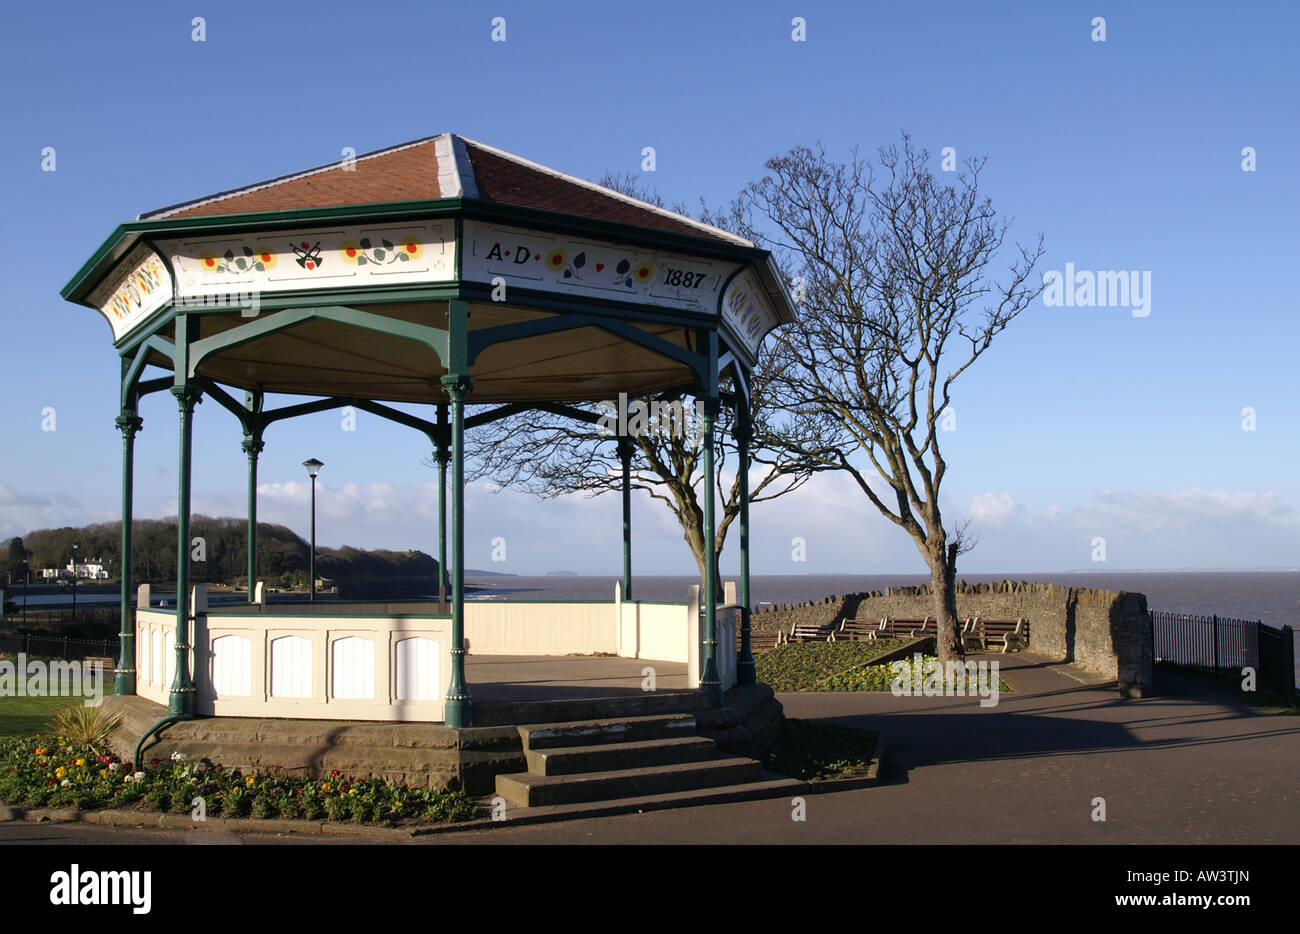 Bandstand Clevedon Somerset England Stock Photo